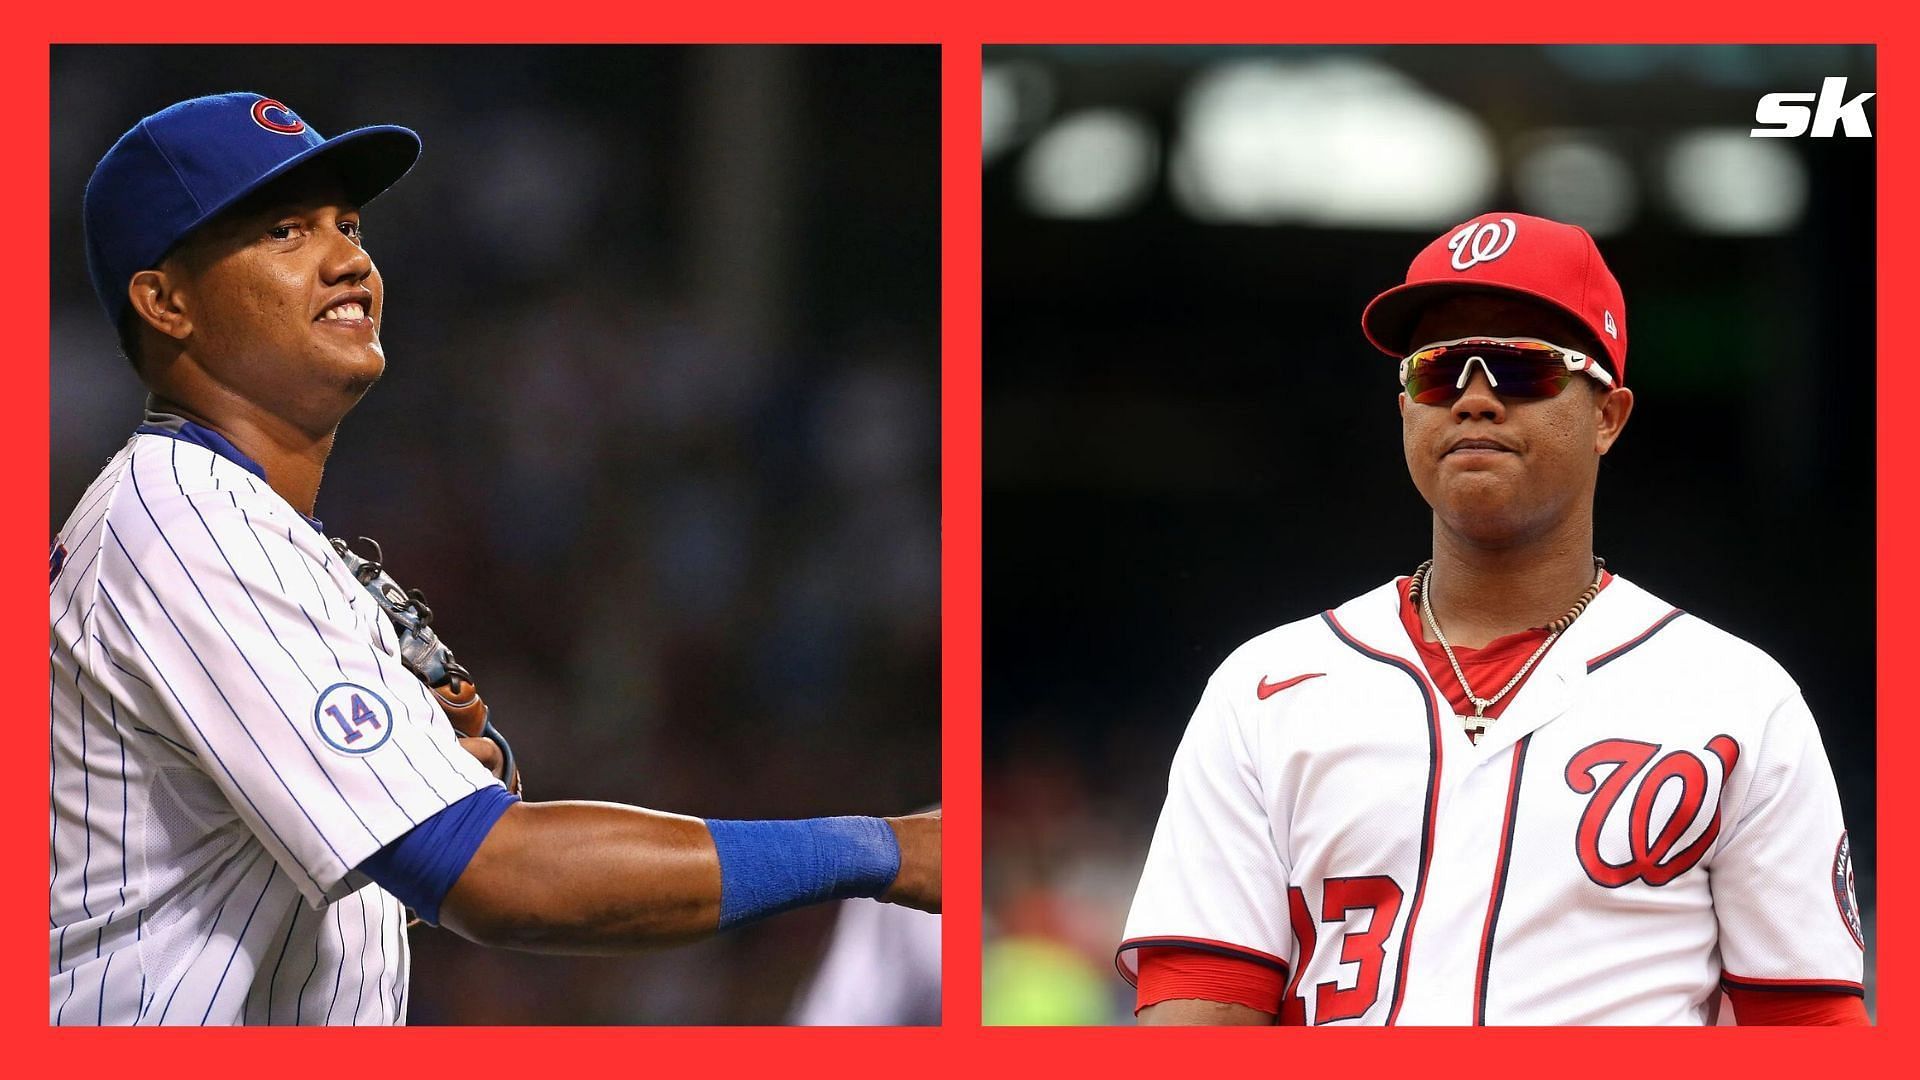 Which players played for the Cubs and Nationals?